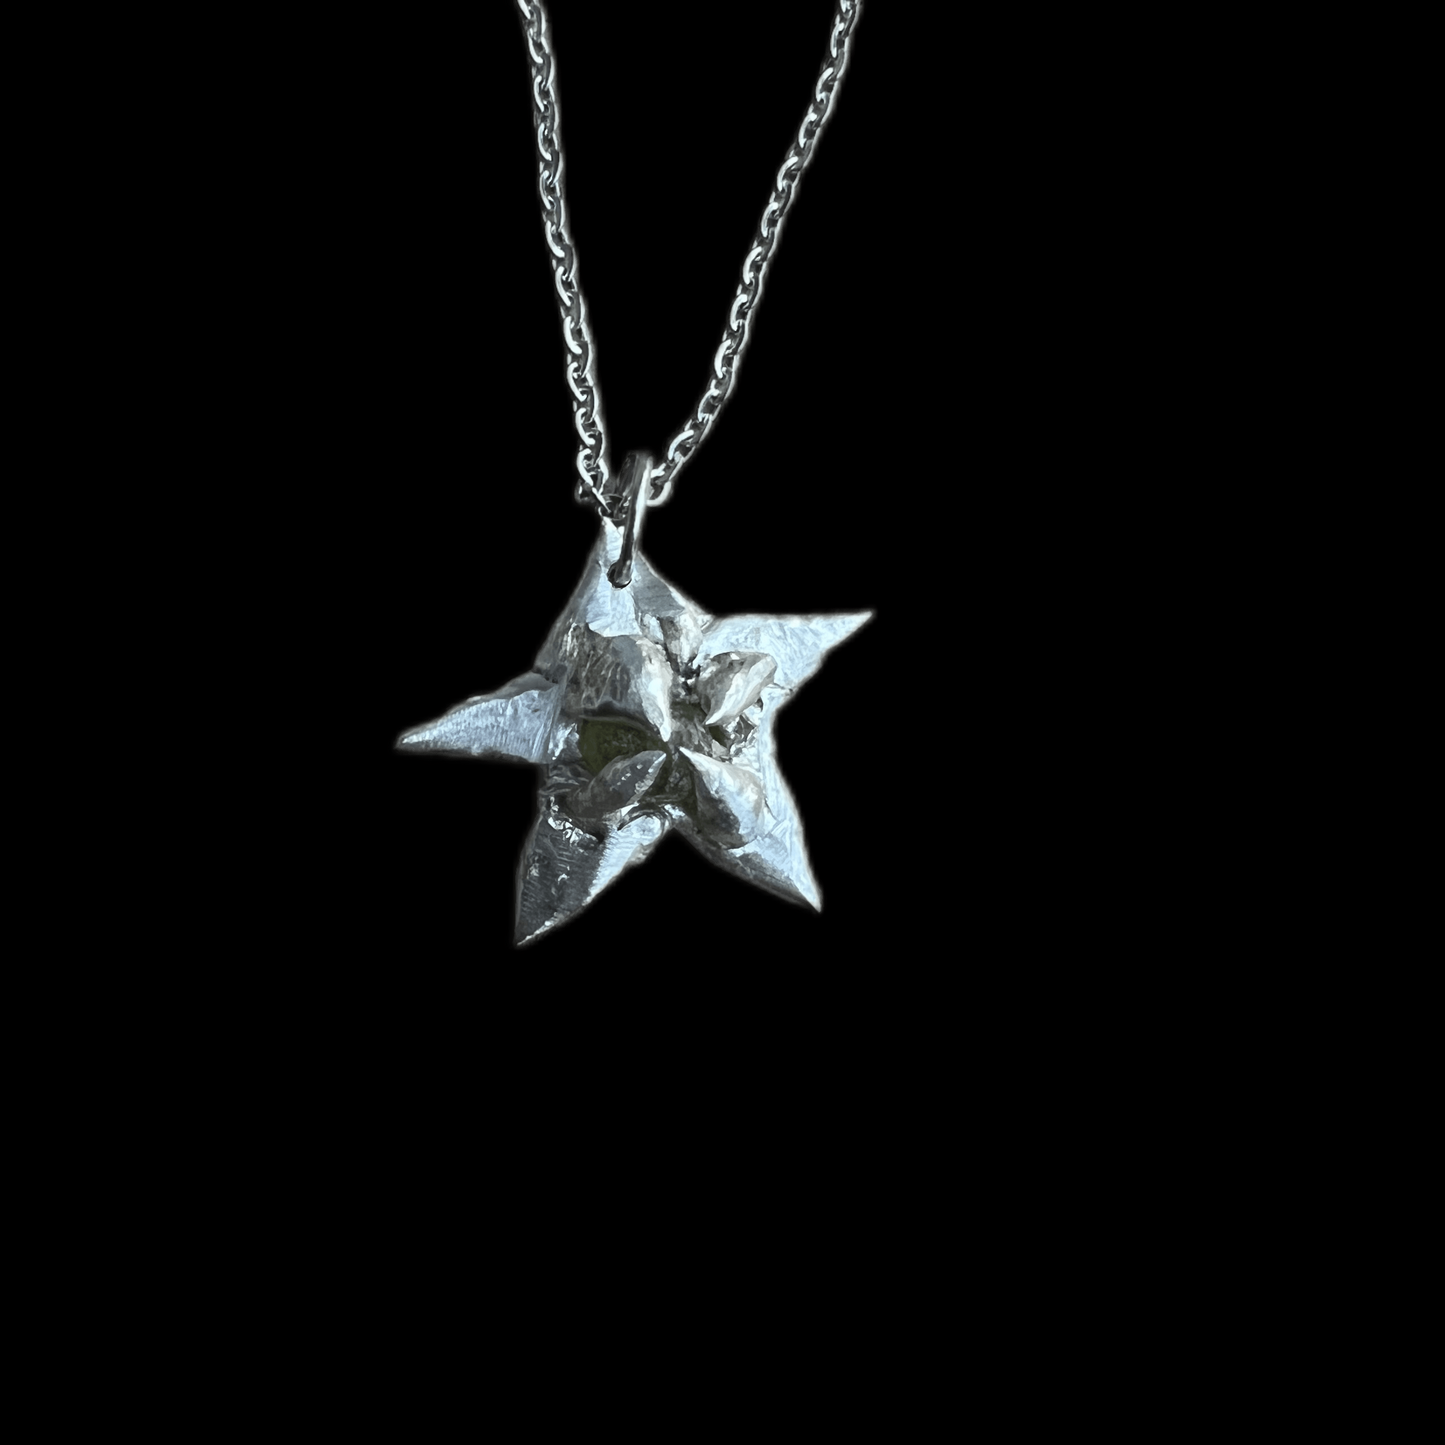 The Outer Space Star Pendent